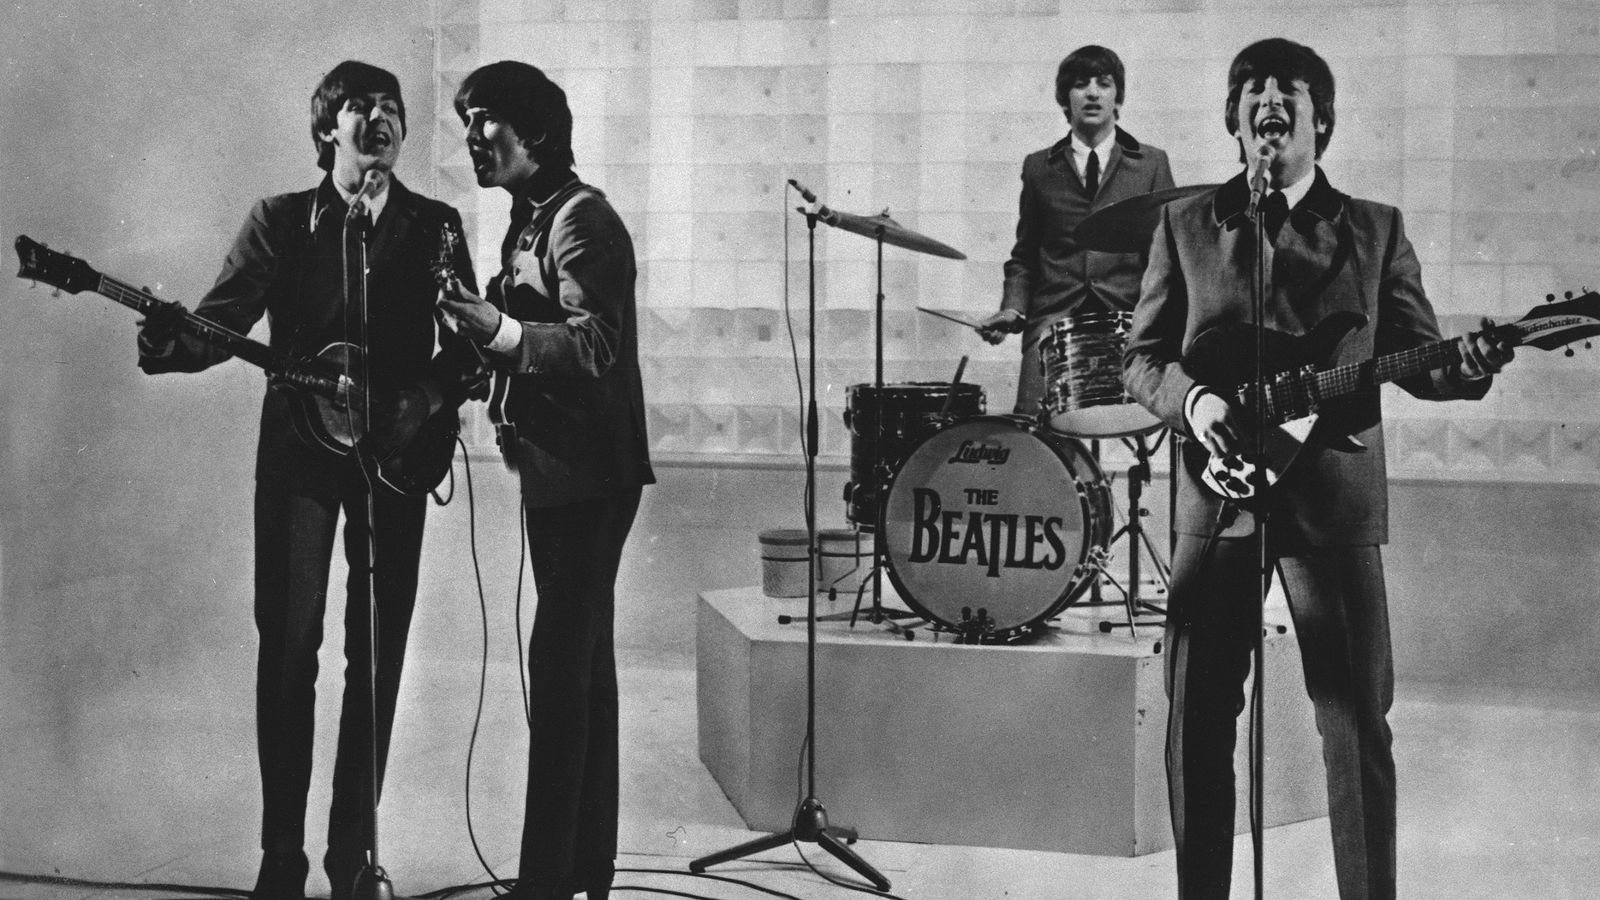 The Beatles 'final song' Now And Then - featuring all four members - released